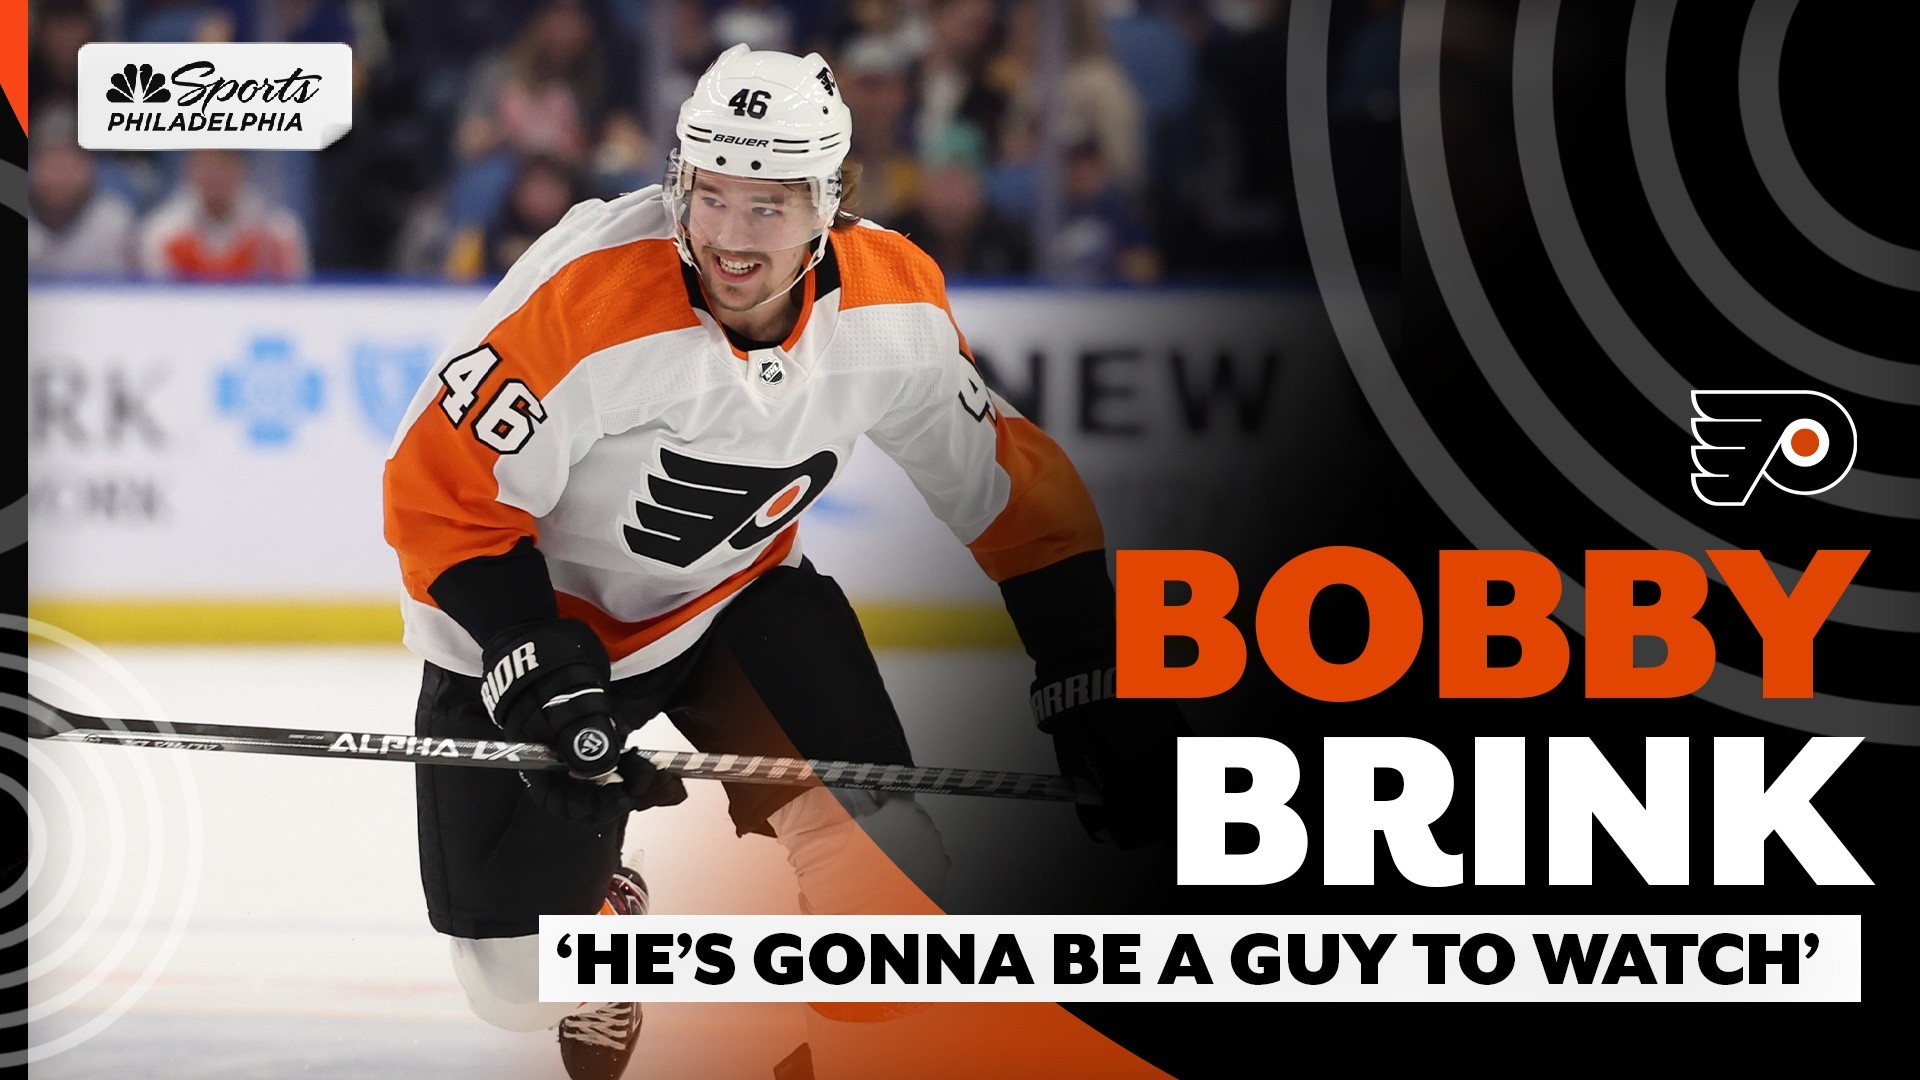 After healthy offseason, Flyers prospect Bobby Brink is going to be a guy to watch